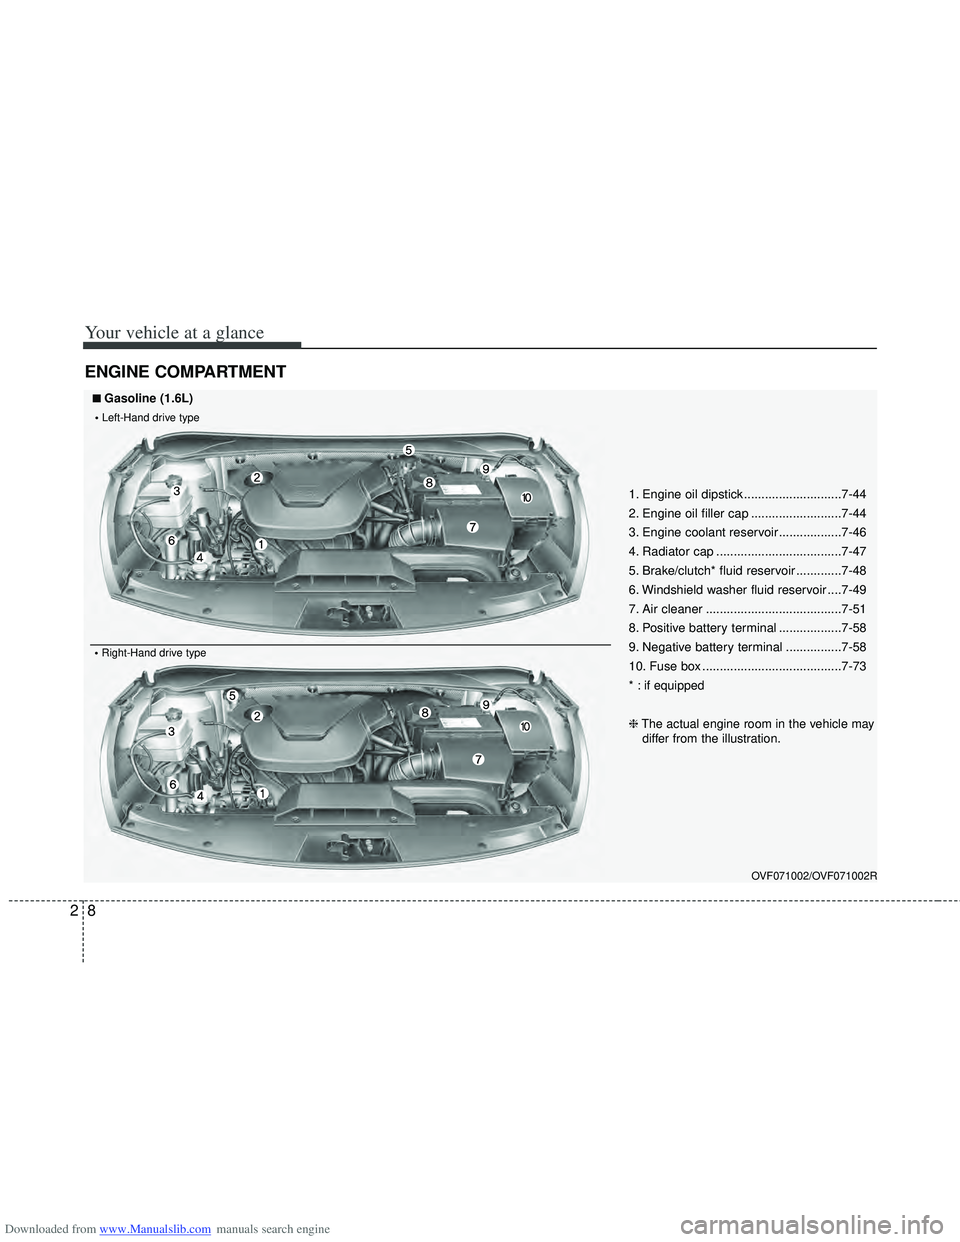 HYUNDAI I40 2018  Owners Manual Downloaded from www.Manualslib.com manuals search engine Your vehicle at a glance
82
ENGINE COMPARTMENT
OVF071002/OVF071002R
1. Engine oil dipstick ............................7-44
2. Engine oil fille